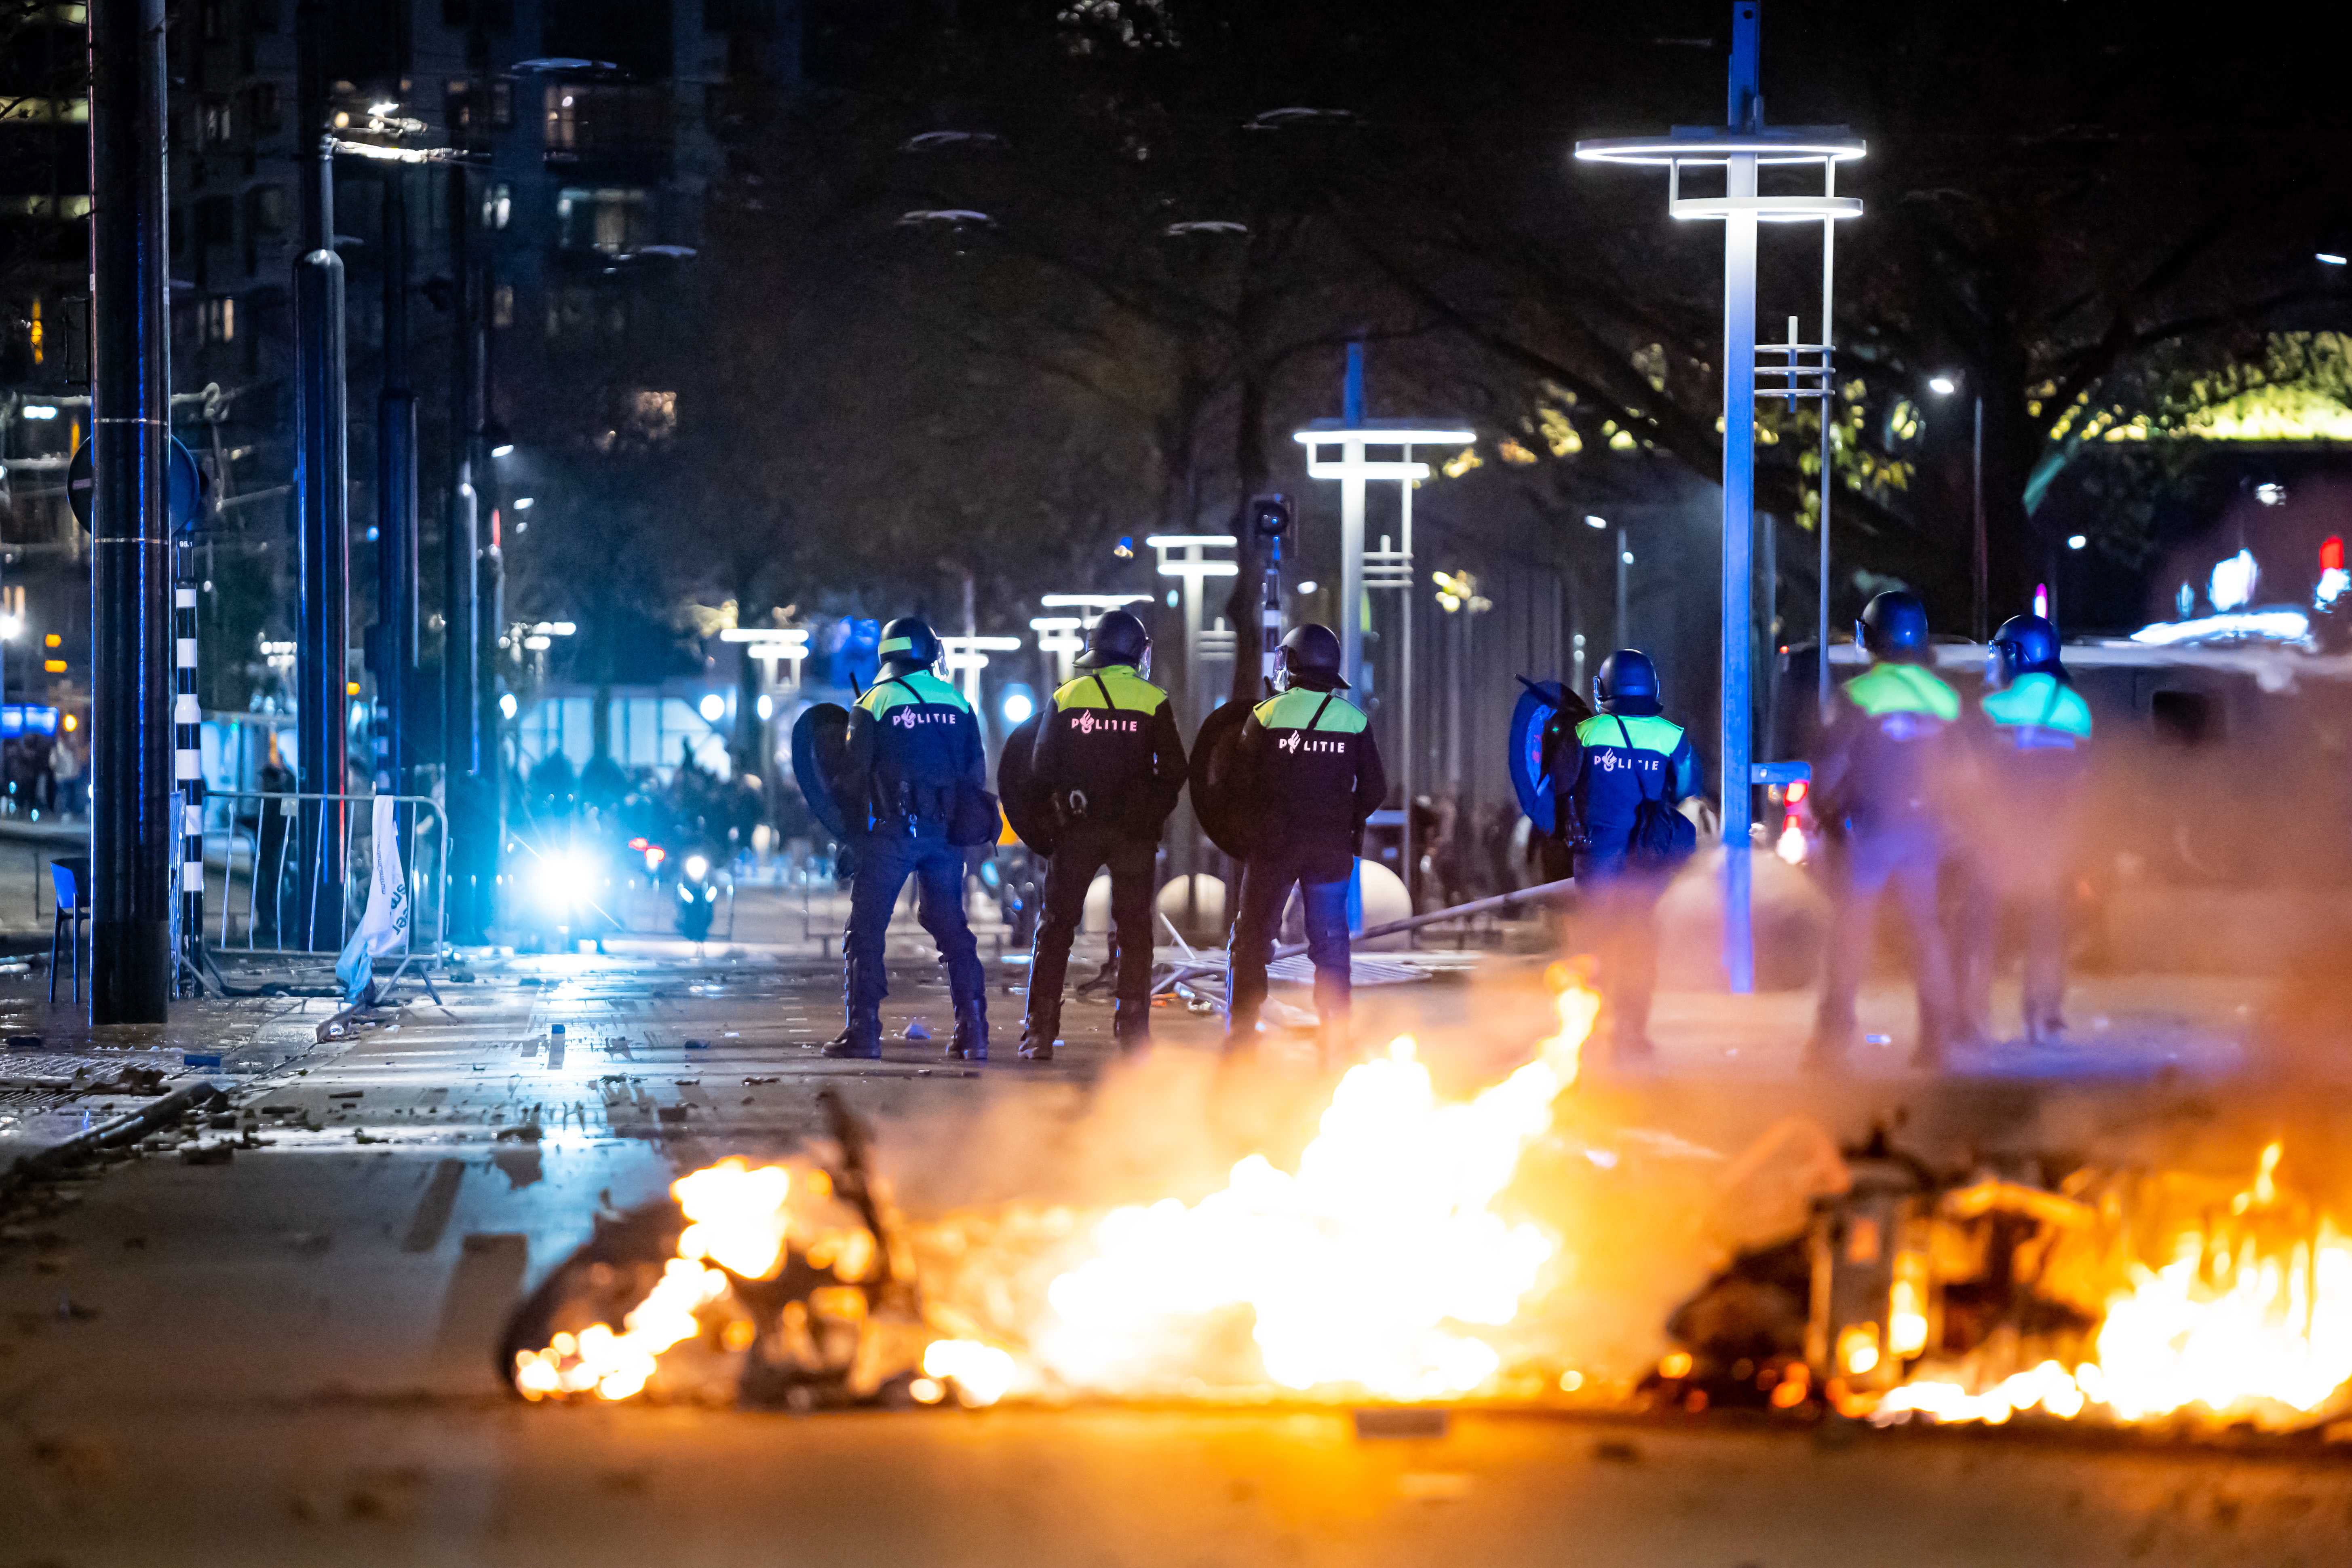 Police respond to violent protests against Covid-19 restrictions in Rotterdam, the Netherlands